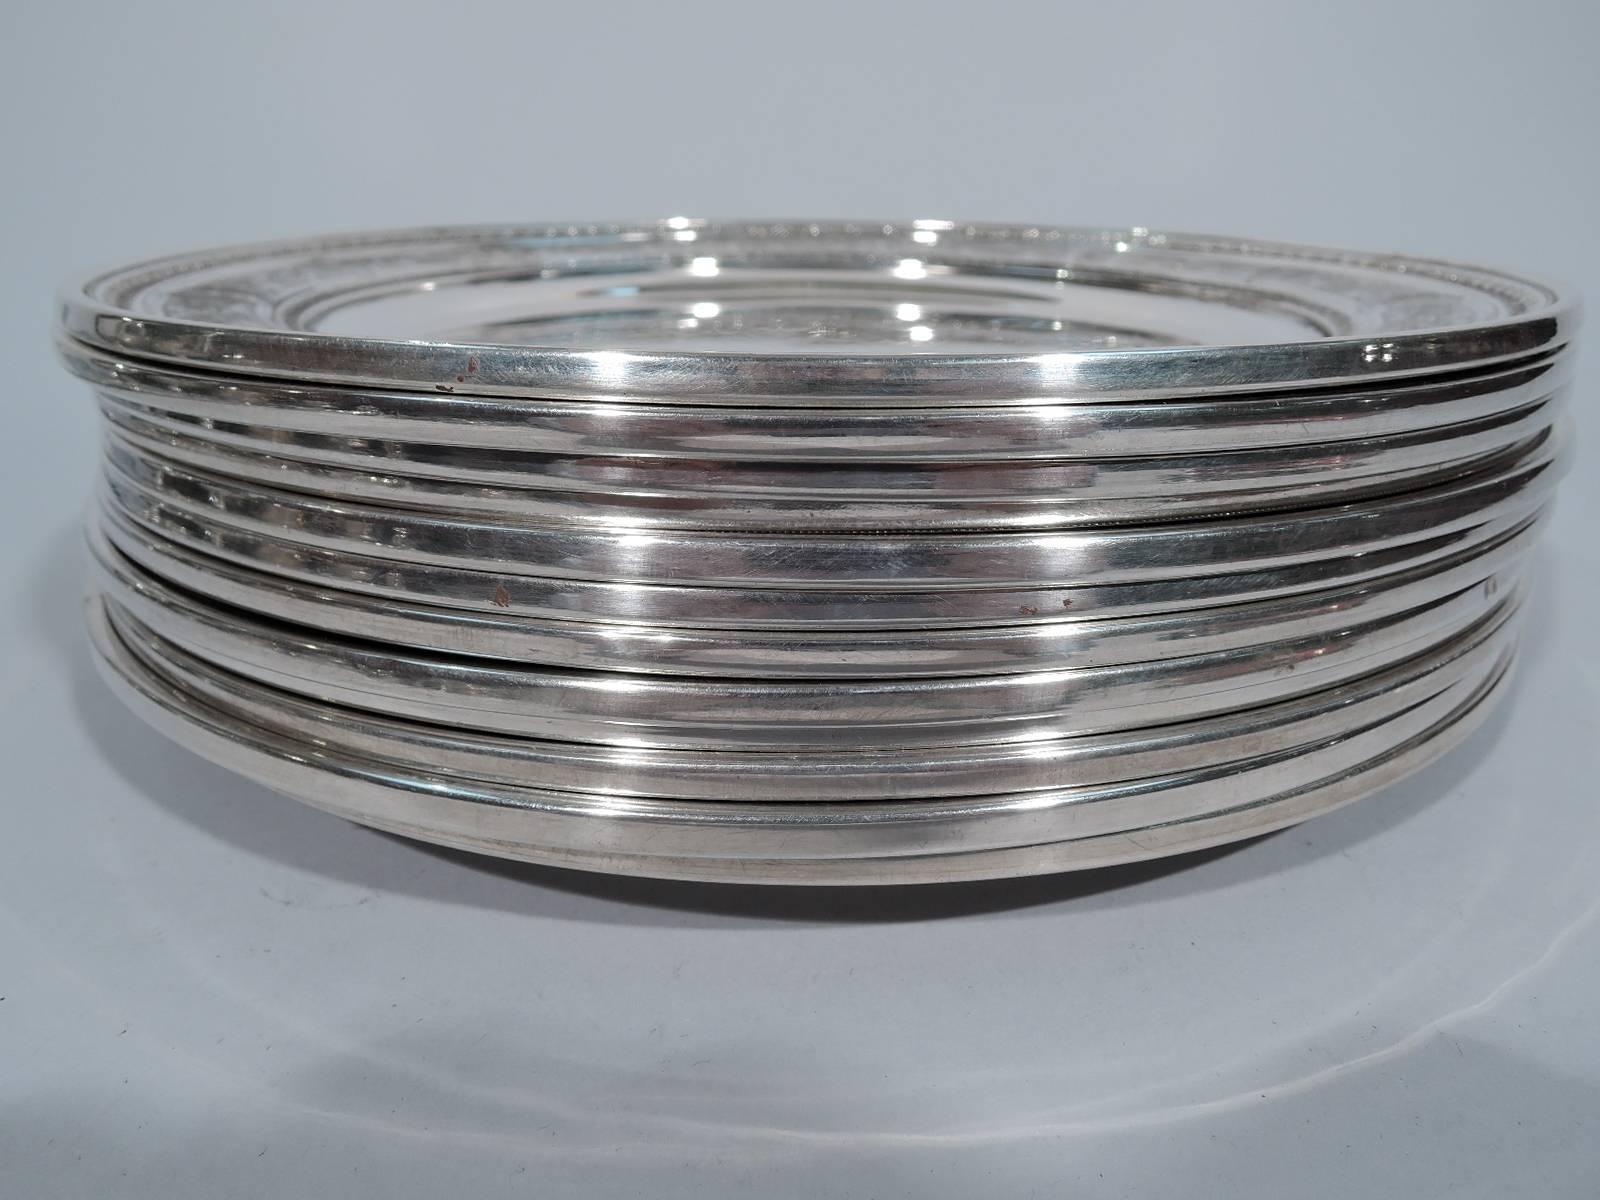 sterling silver plates